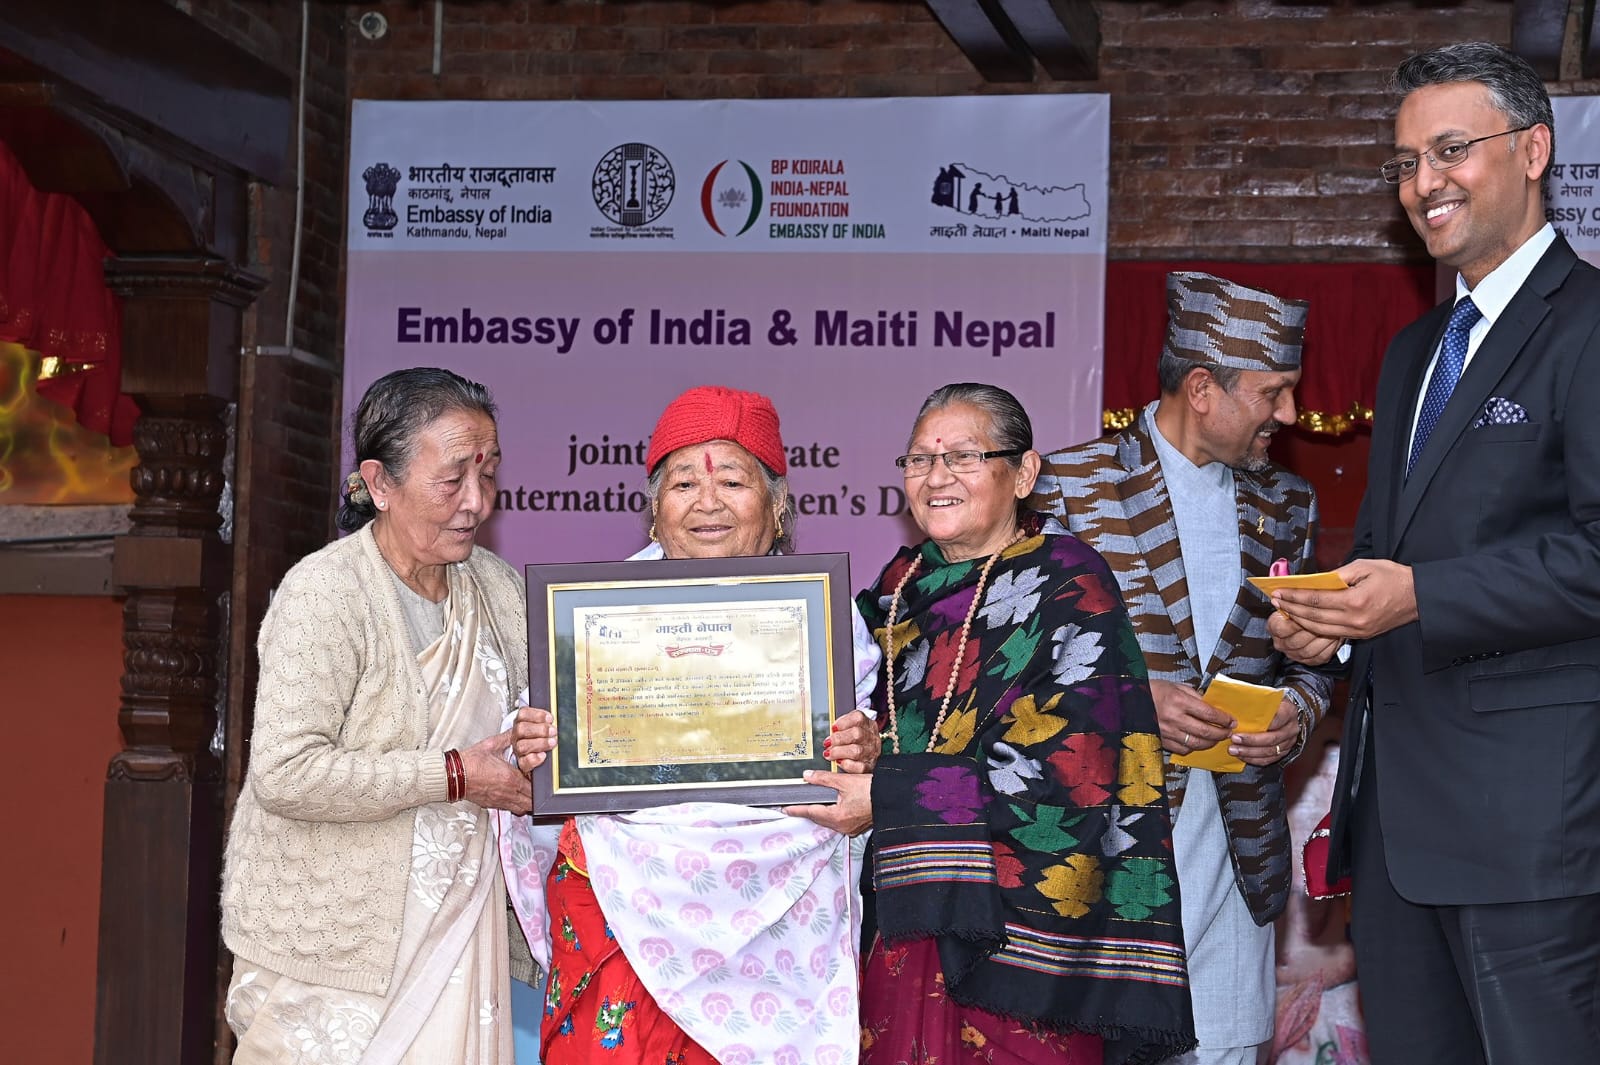 Embassy of India and Maiti Nepal join forces to celebrate International Women’s Day